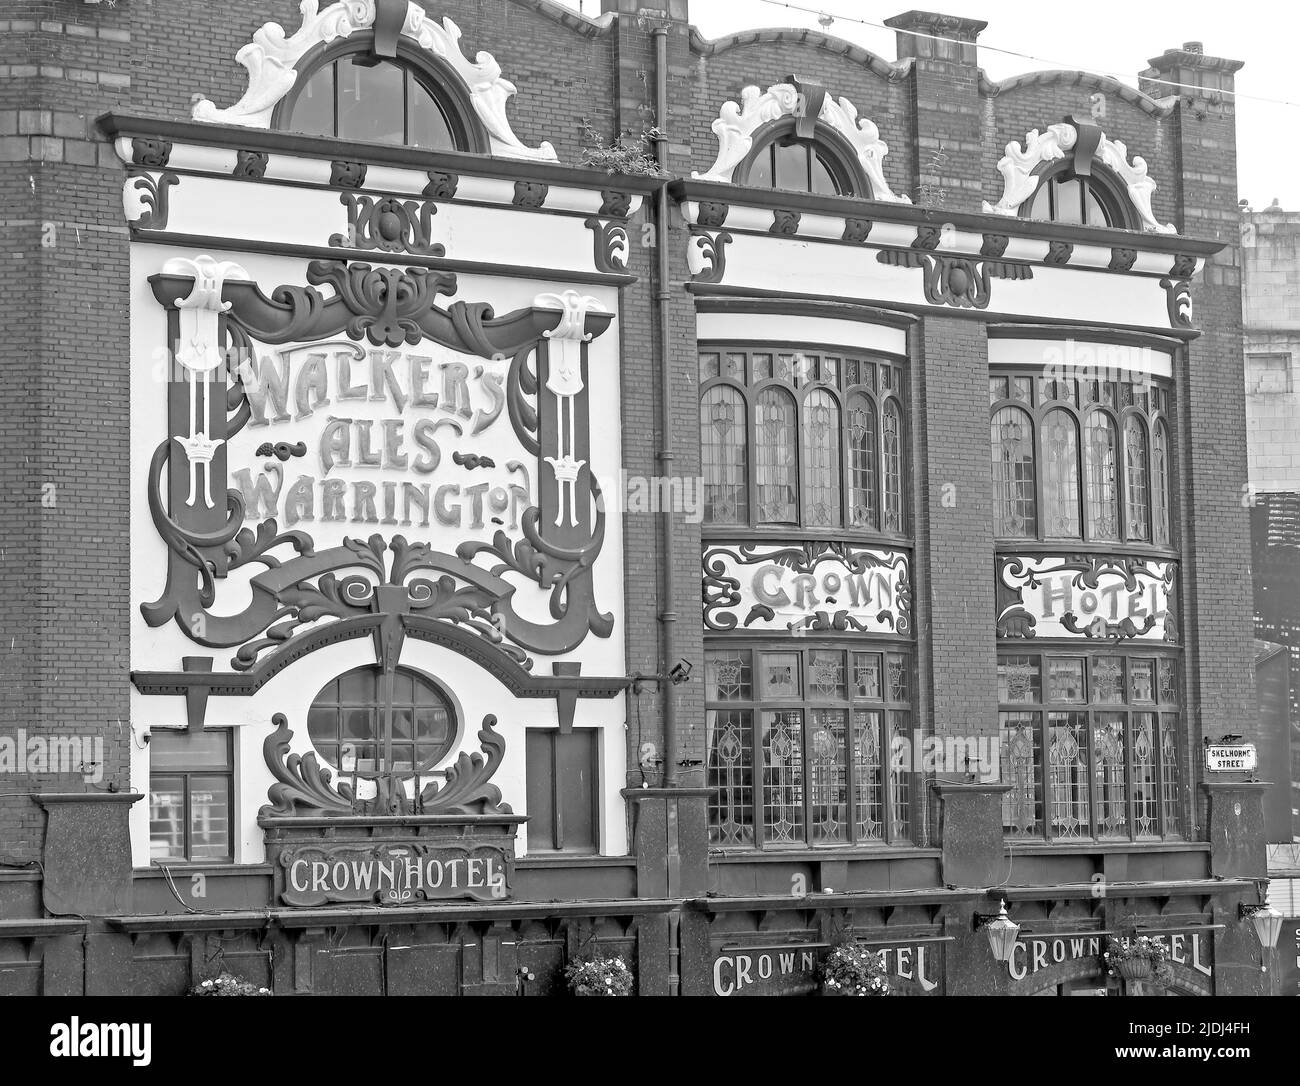 The Crown Hotel, Walkers Ales from Warrington, 43 Lime Street, Liverpool, Merseyside, Angleterre, L1 1NY in BW Banque D'Images